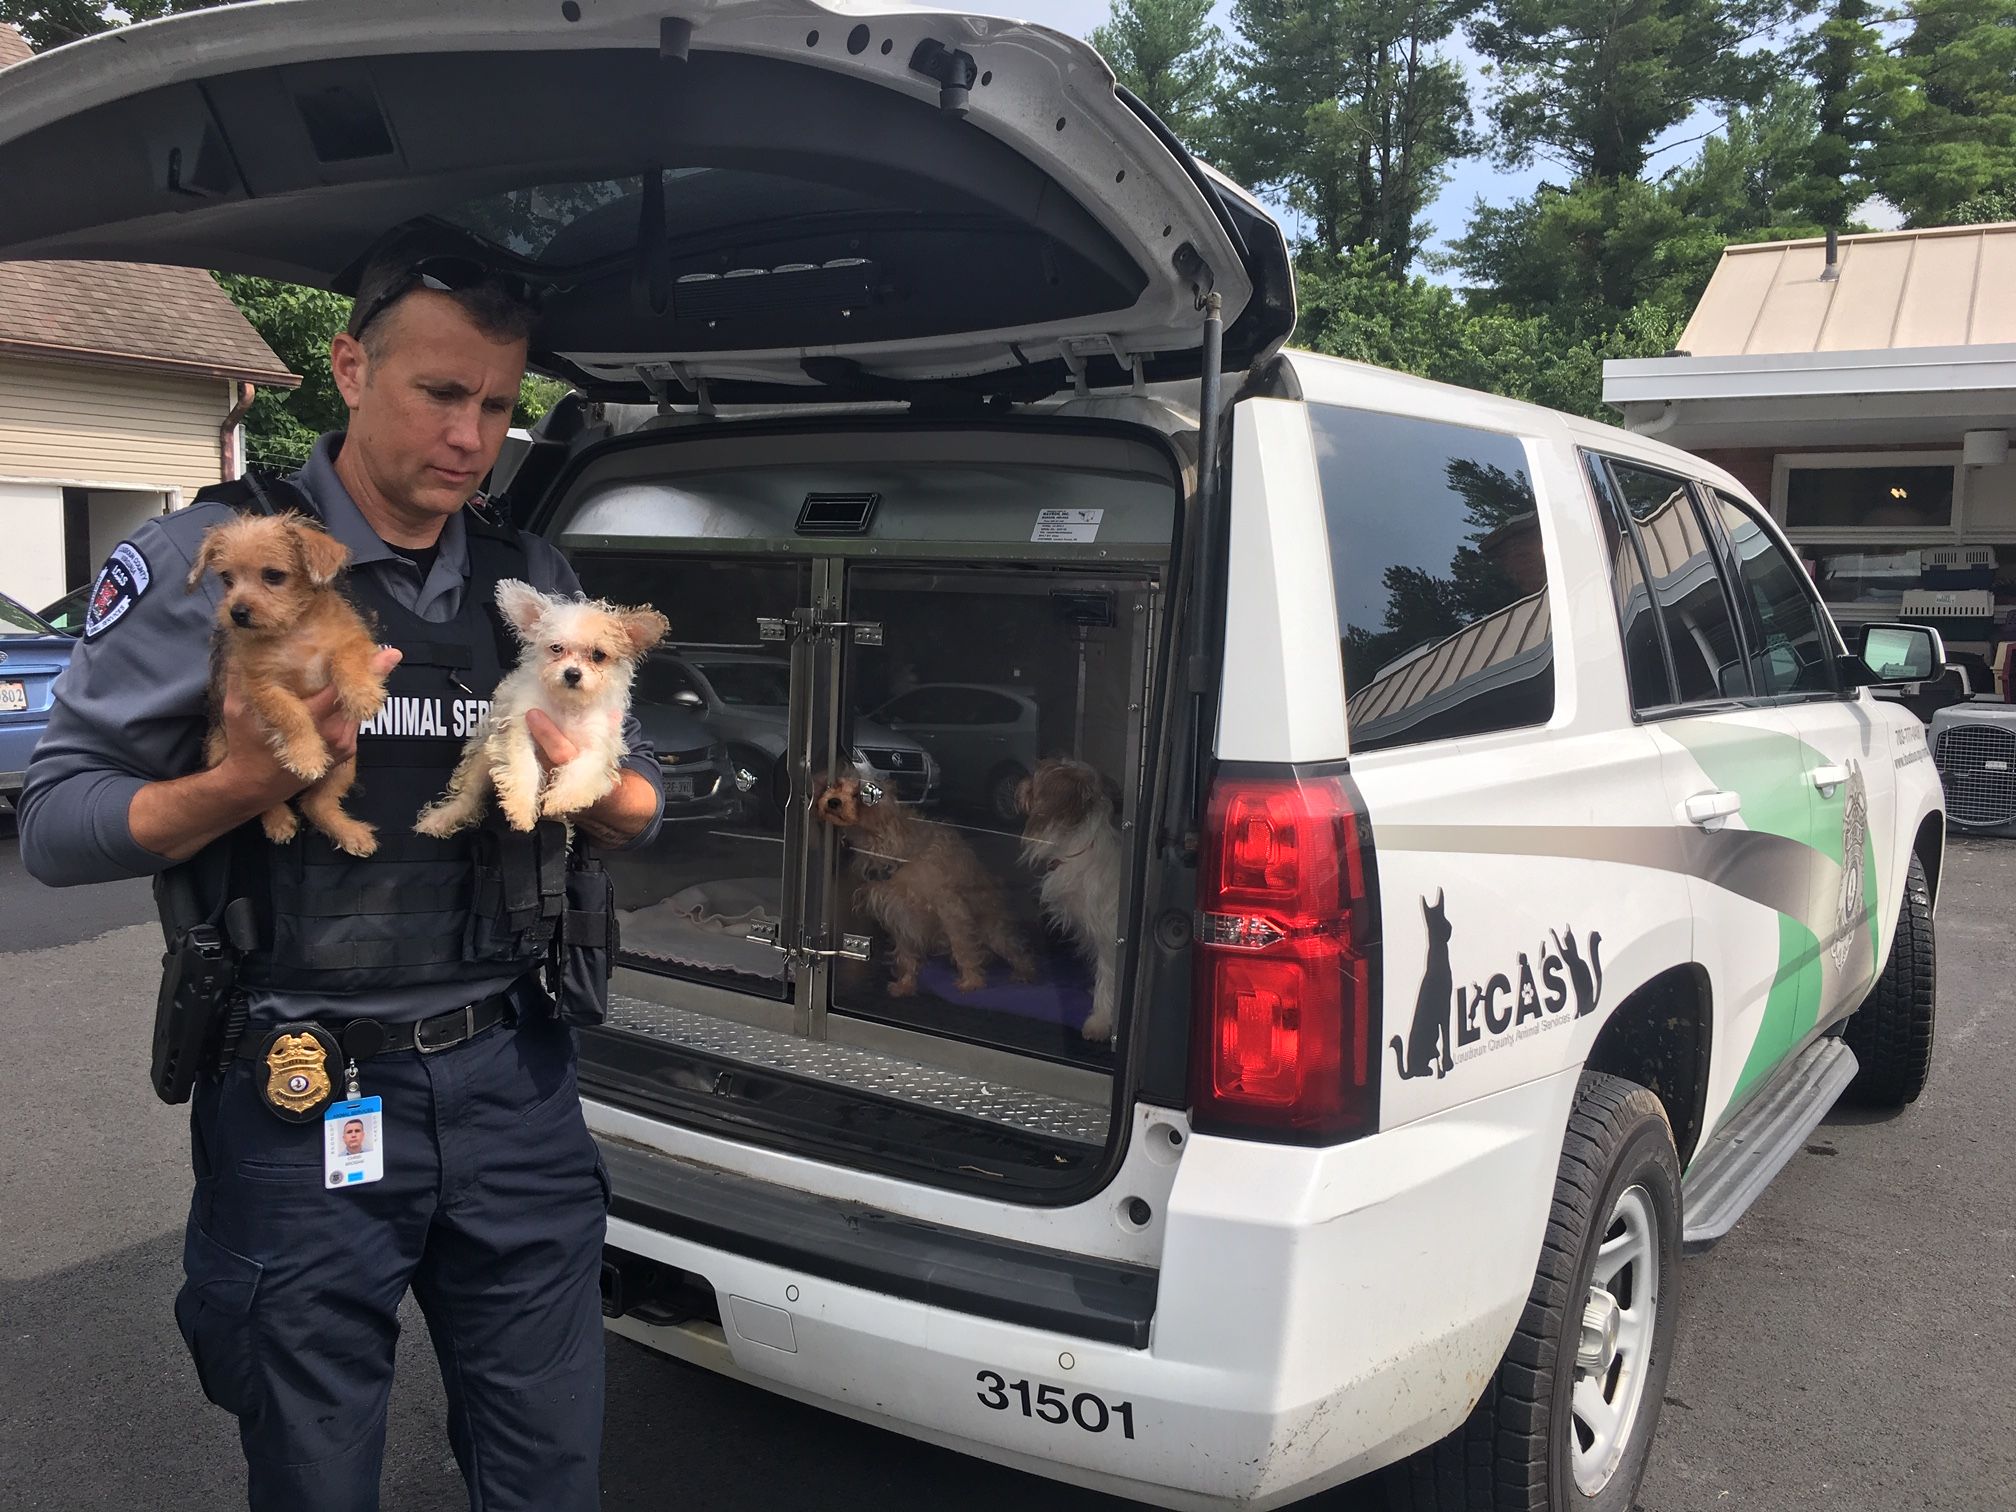 2 arrested, 18 animals seized in Loudoun Co. animal cruelty case - WTOP News